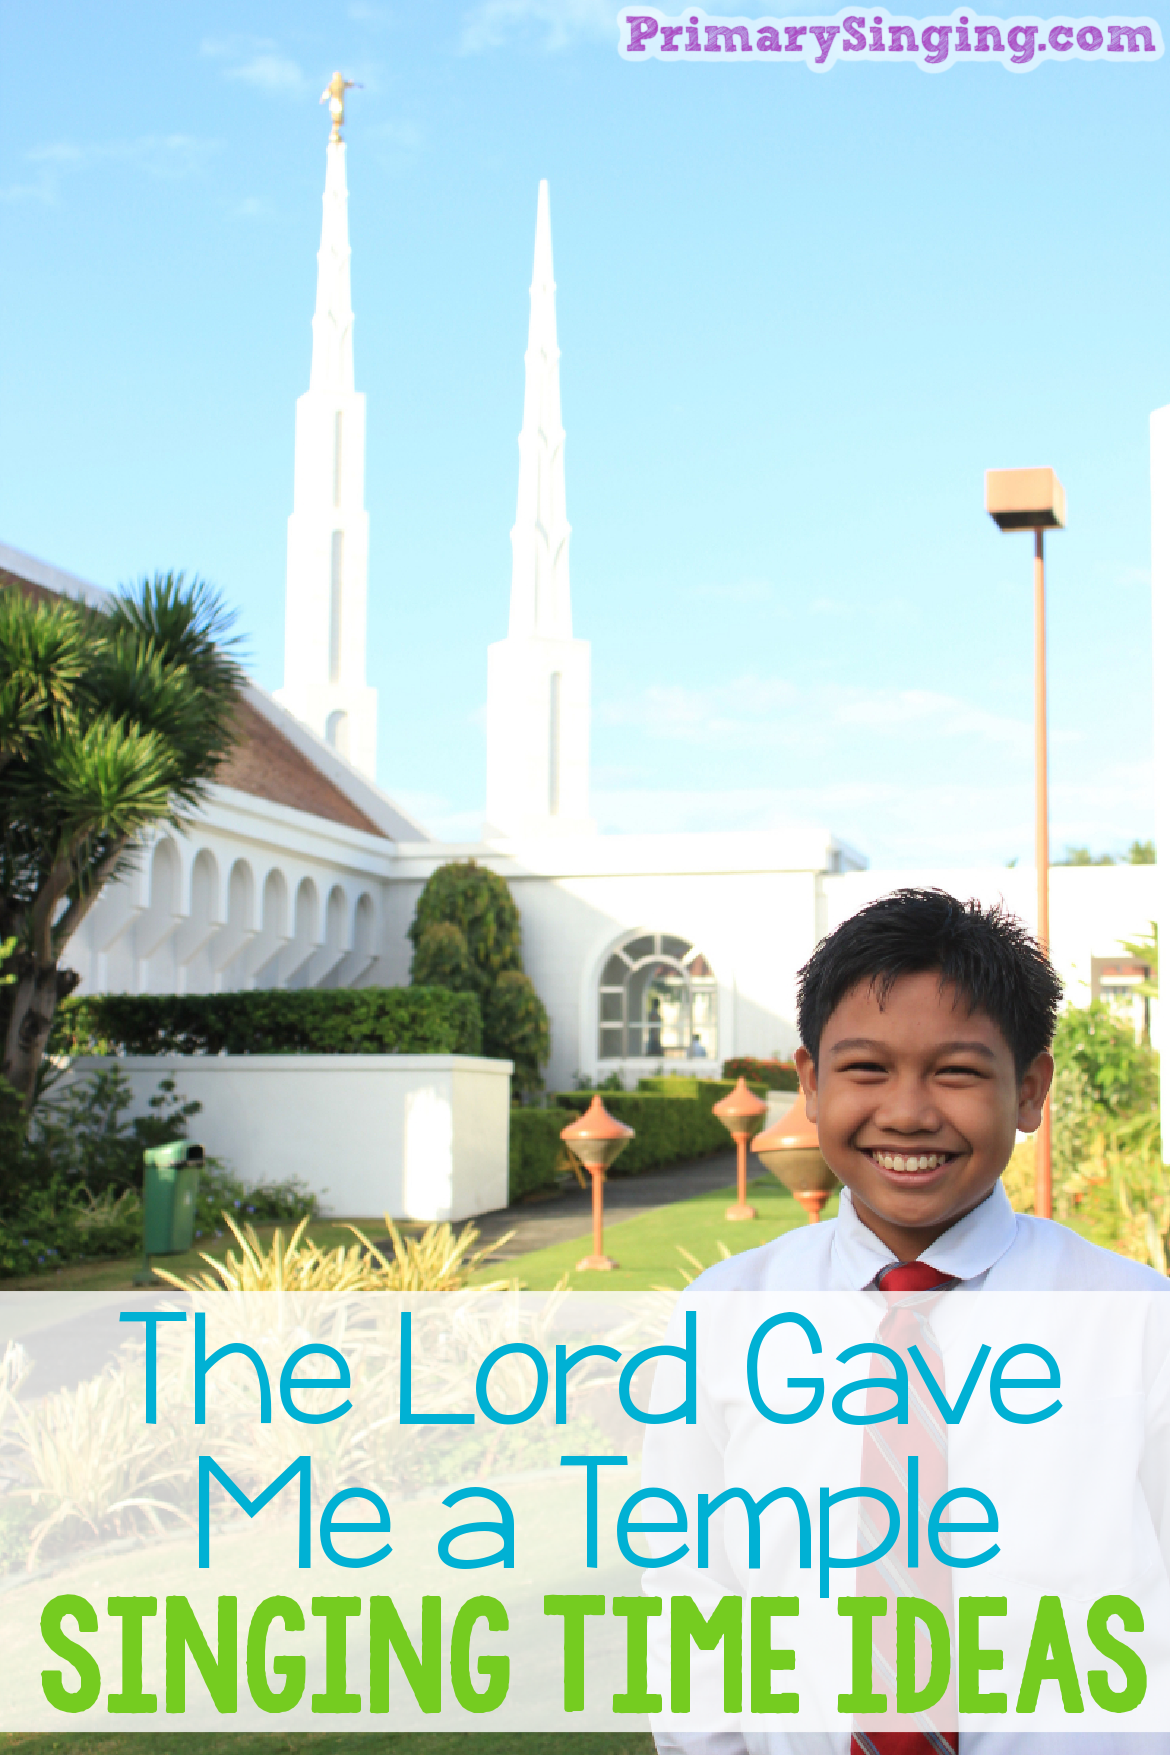 The Lord Gave Me a Temple singing time ideas fun ways to teach this song for LDS Primary Music leaders as part of the New Testament Come Follow Me song list! Including printable song helps and fun activities including yoga, picture puzzle, draw the song, what comes next and more!